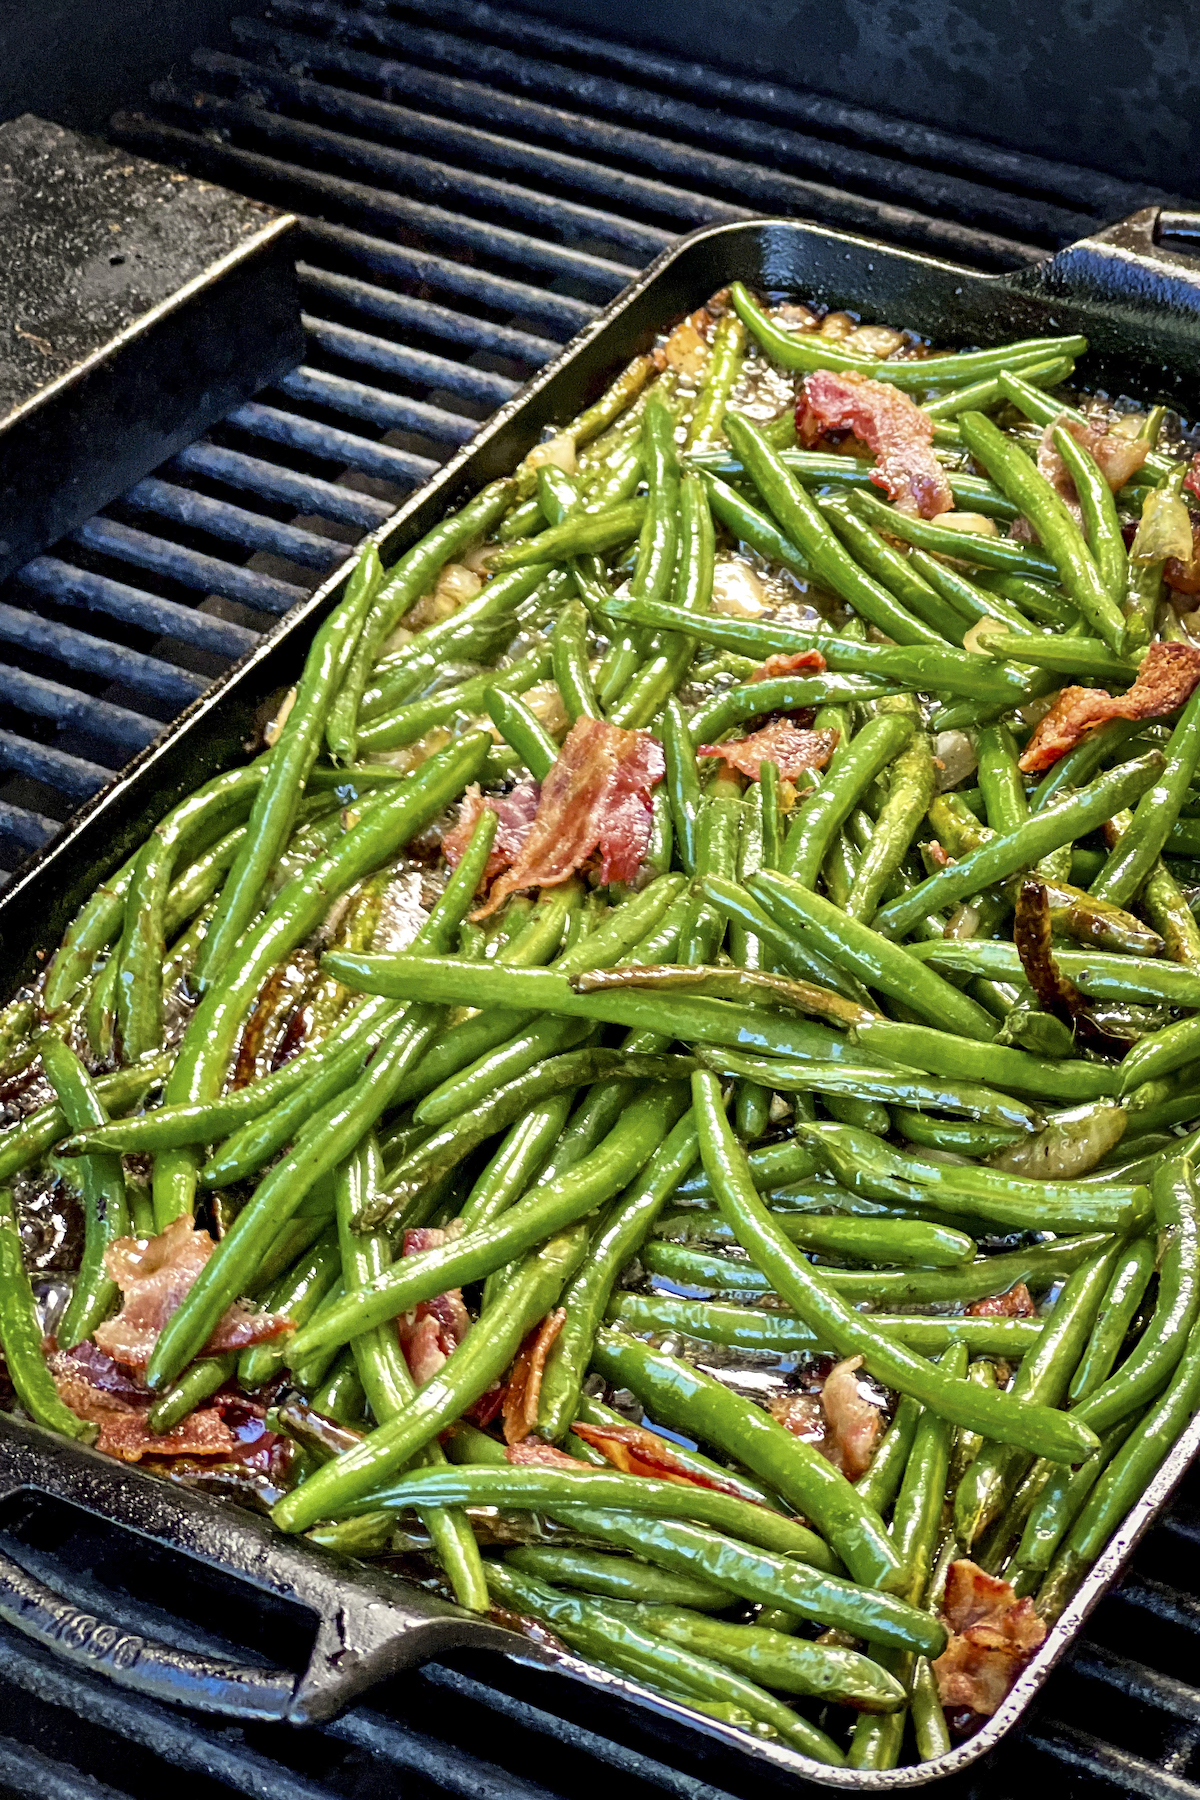 Green Beans with Bacon are in a cast iron pan on the grill.